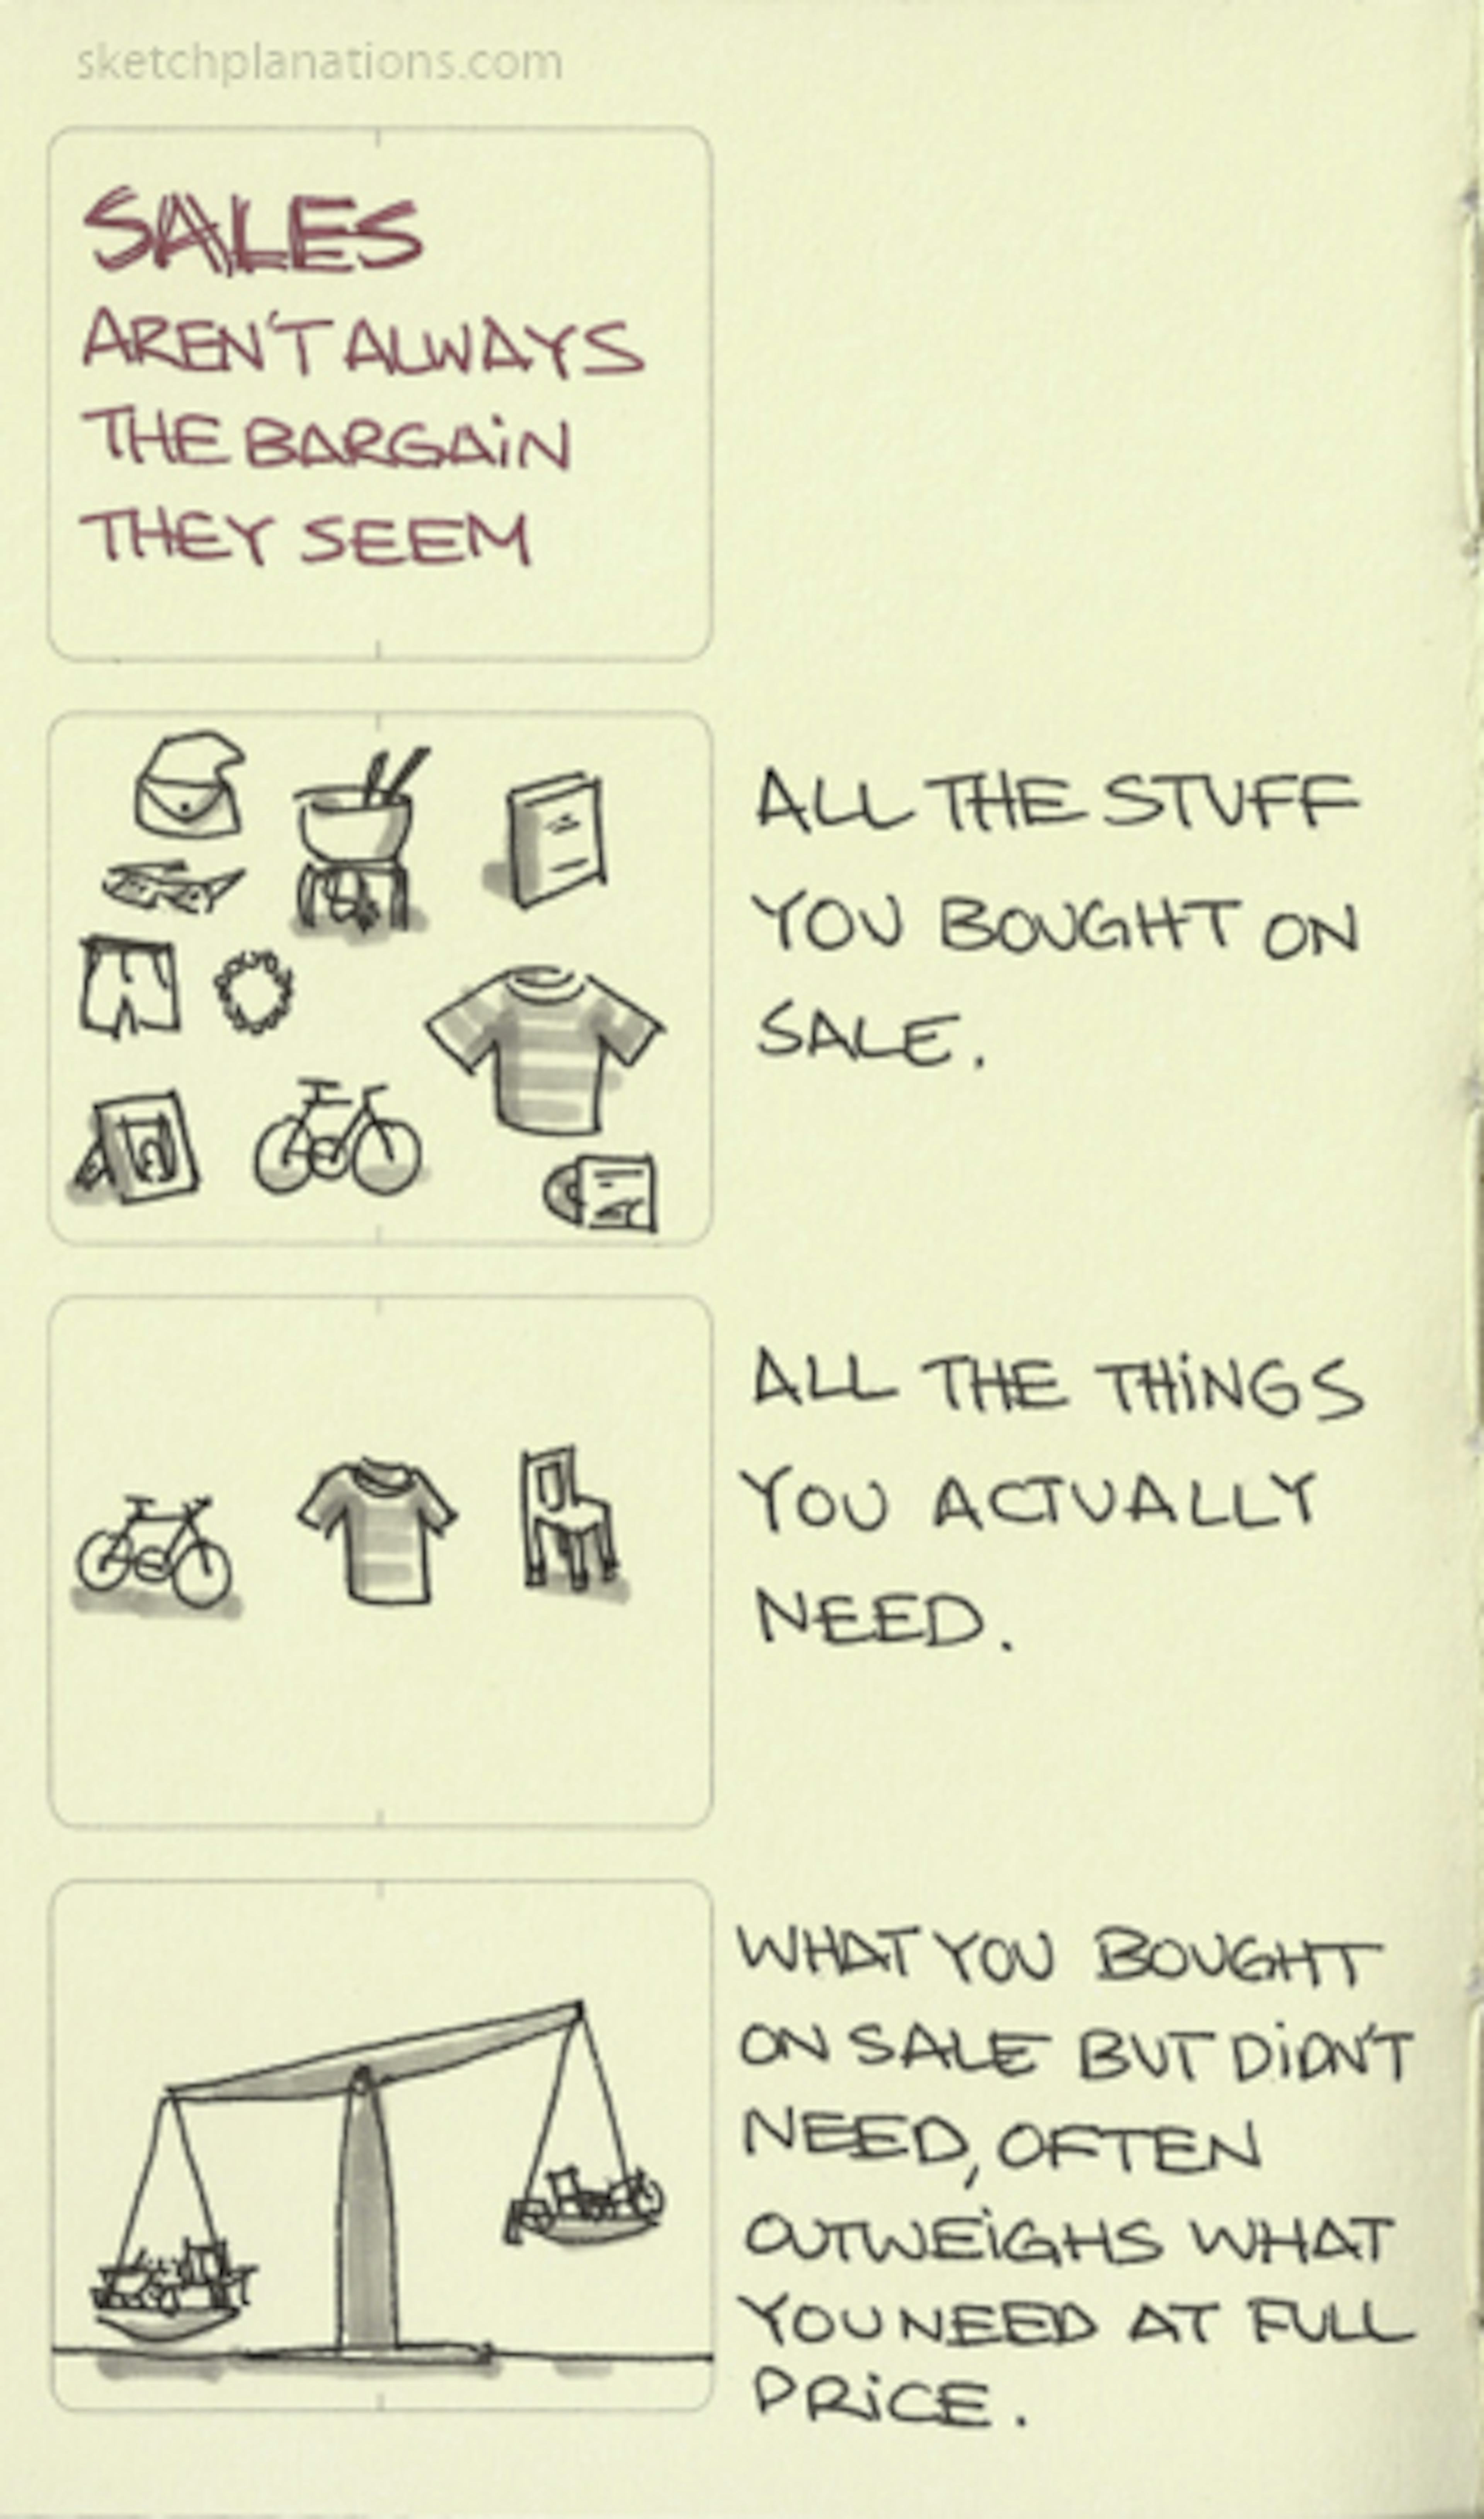 Sales aren’t always the bargain they seem - Sketchplanations